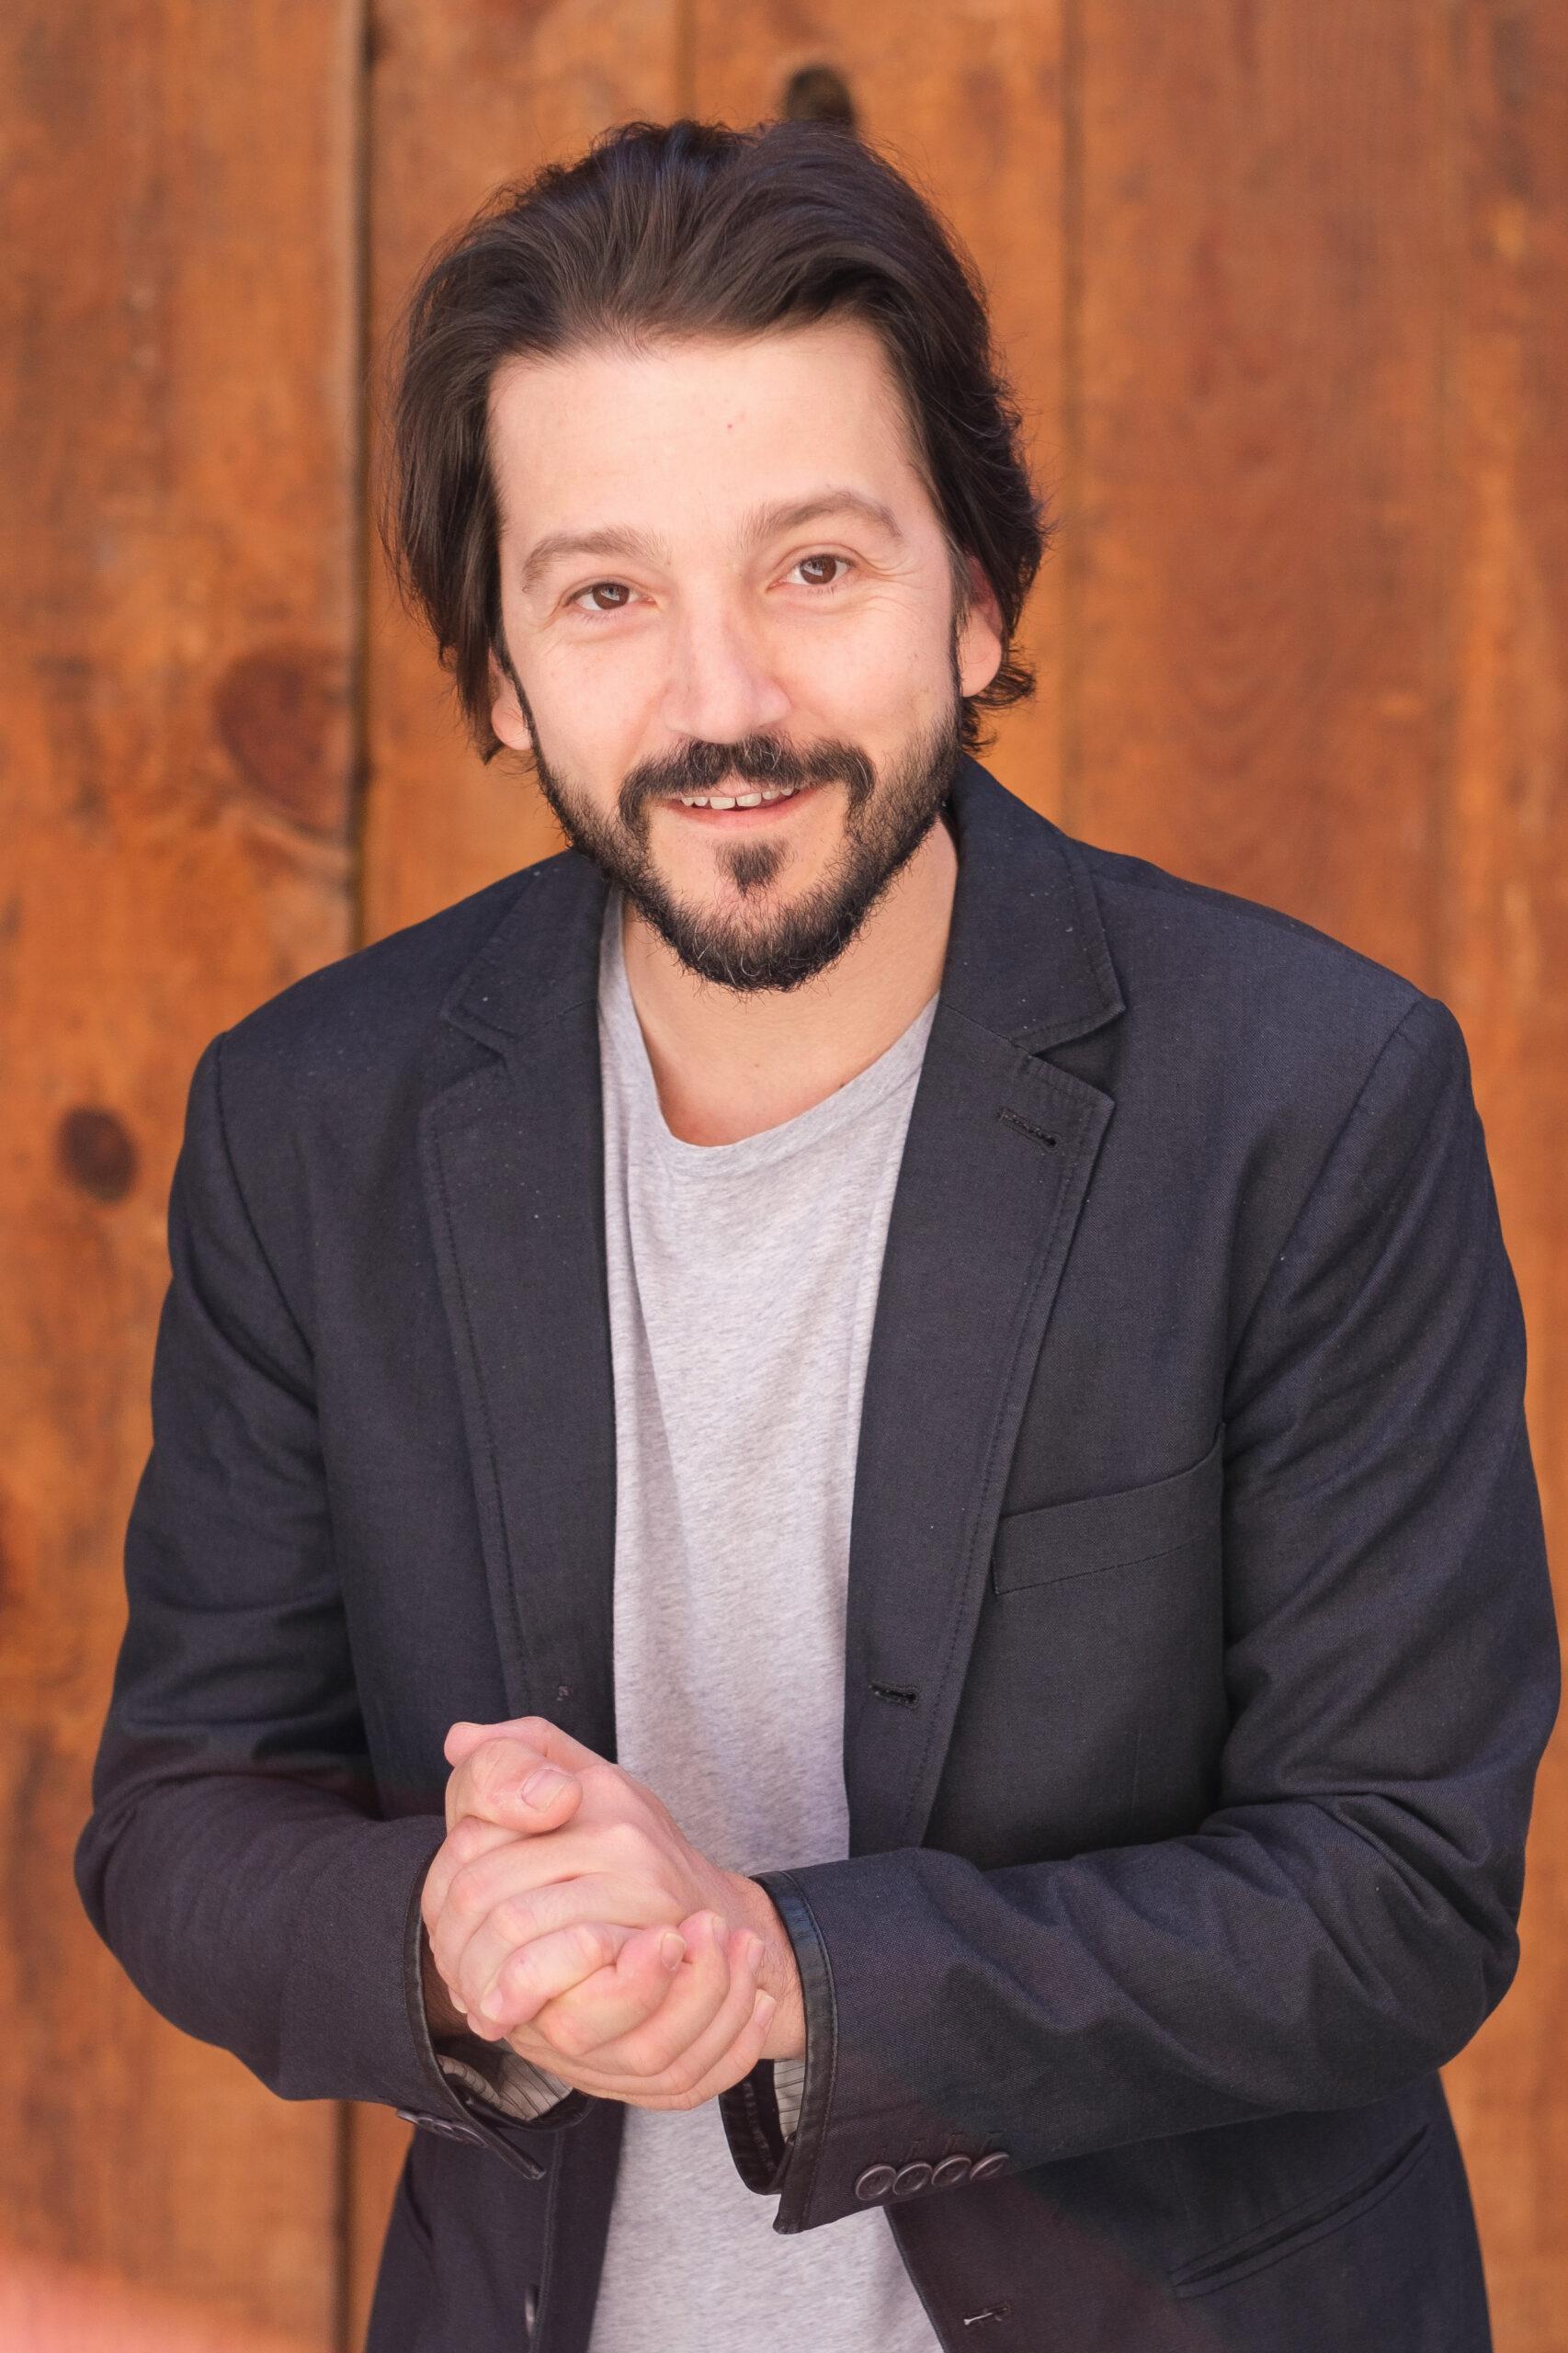 Mexican actor Diego Luna during the portrait session in Madrid, Spain - 22 Jun 2022